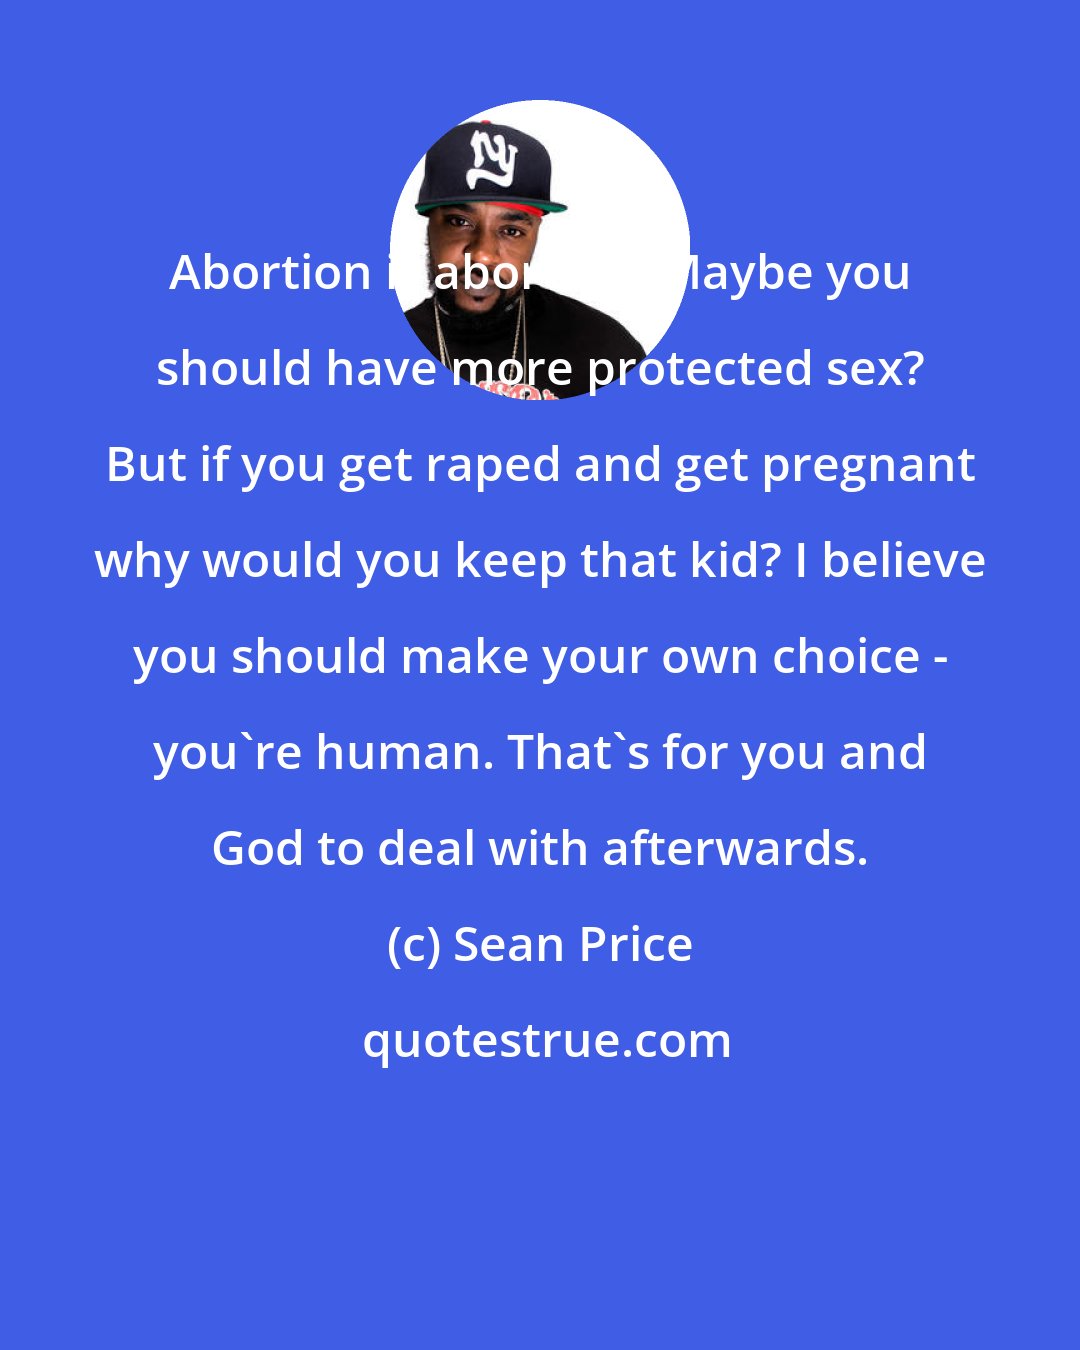 Sean Price: Abortion is abortion. Maybe you should have more protected sex? But if you get raped and get pregnant why would you keep that kid? I believe you should make your own choice - you're human. That's for you and God to deal with afterwards.